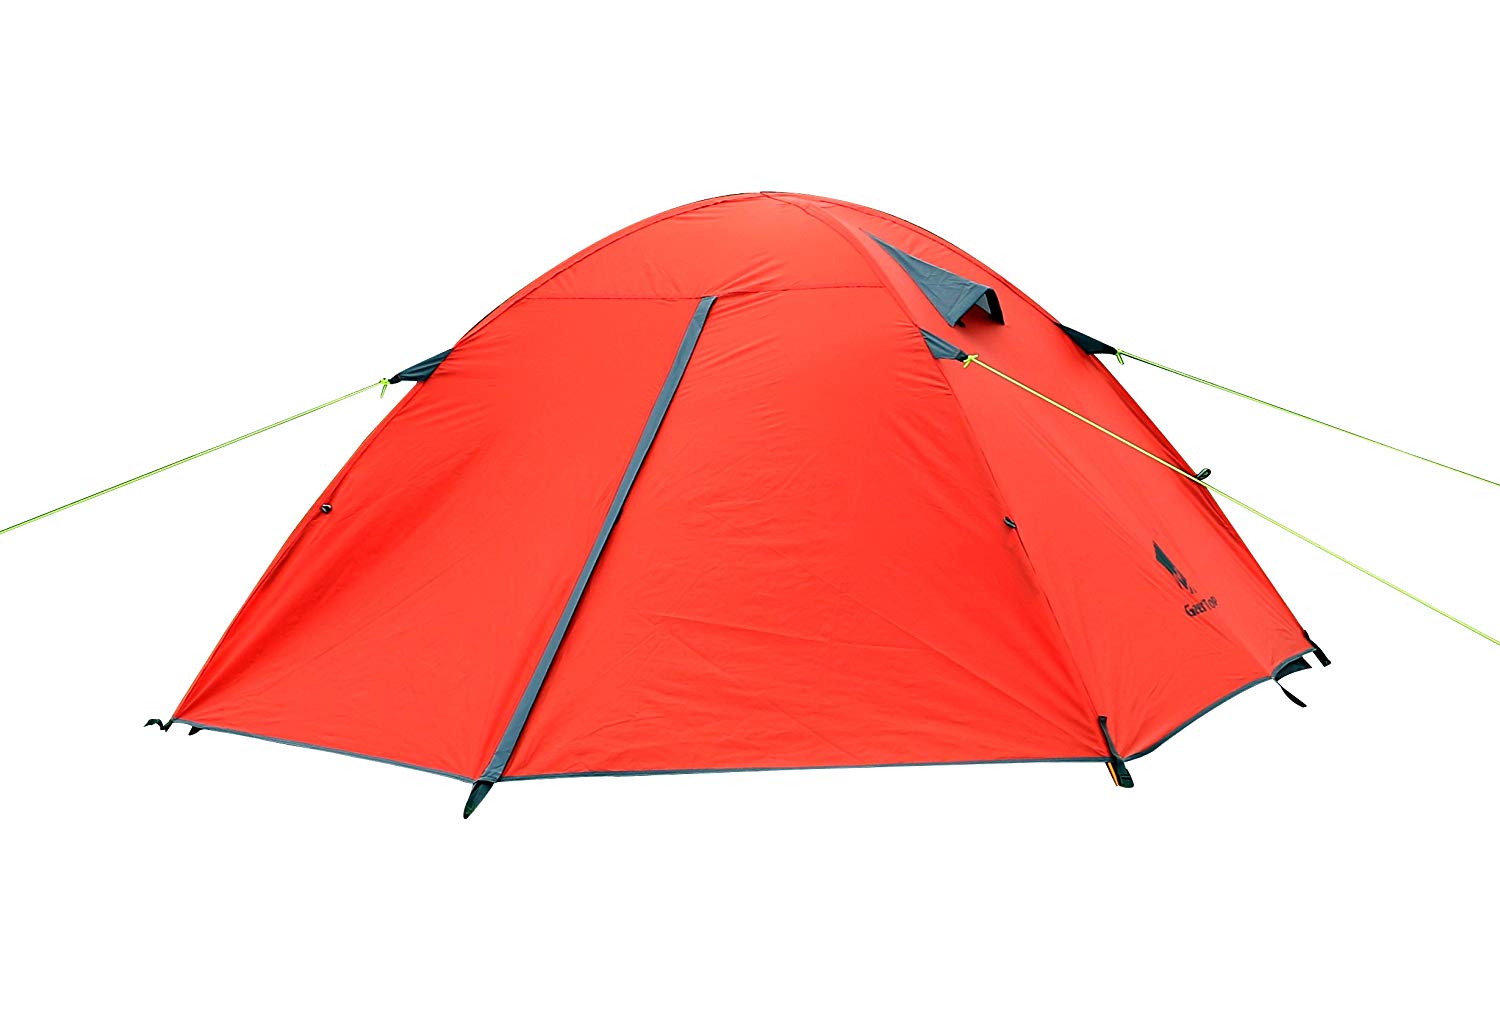 GeerTop Toproad Ⅲ3 Person 3 Season Backpacking Camping Tent